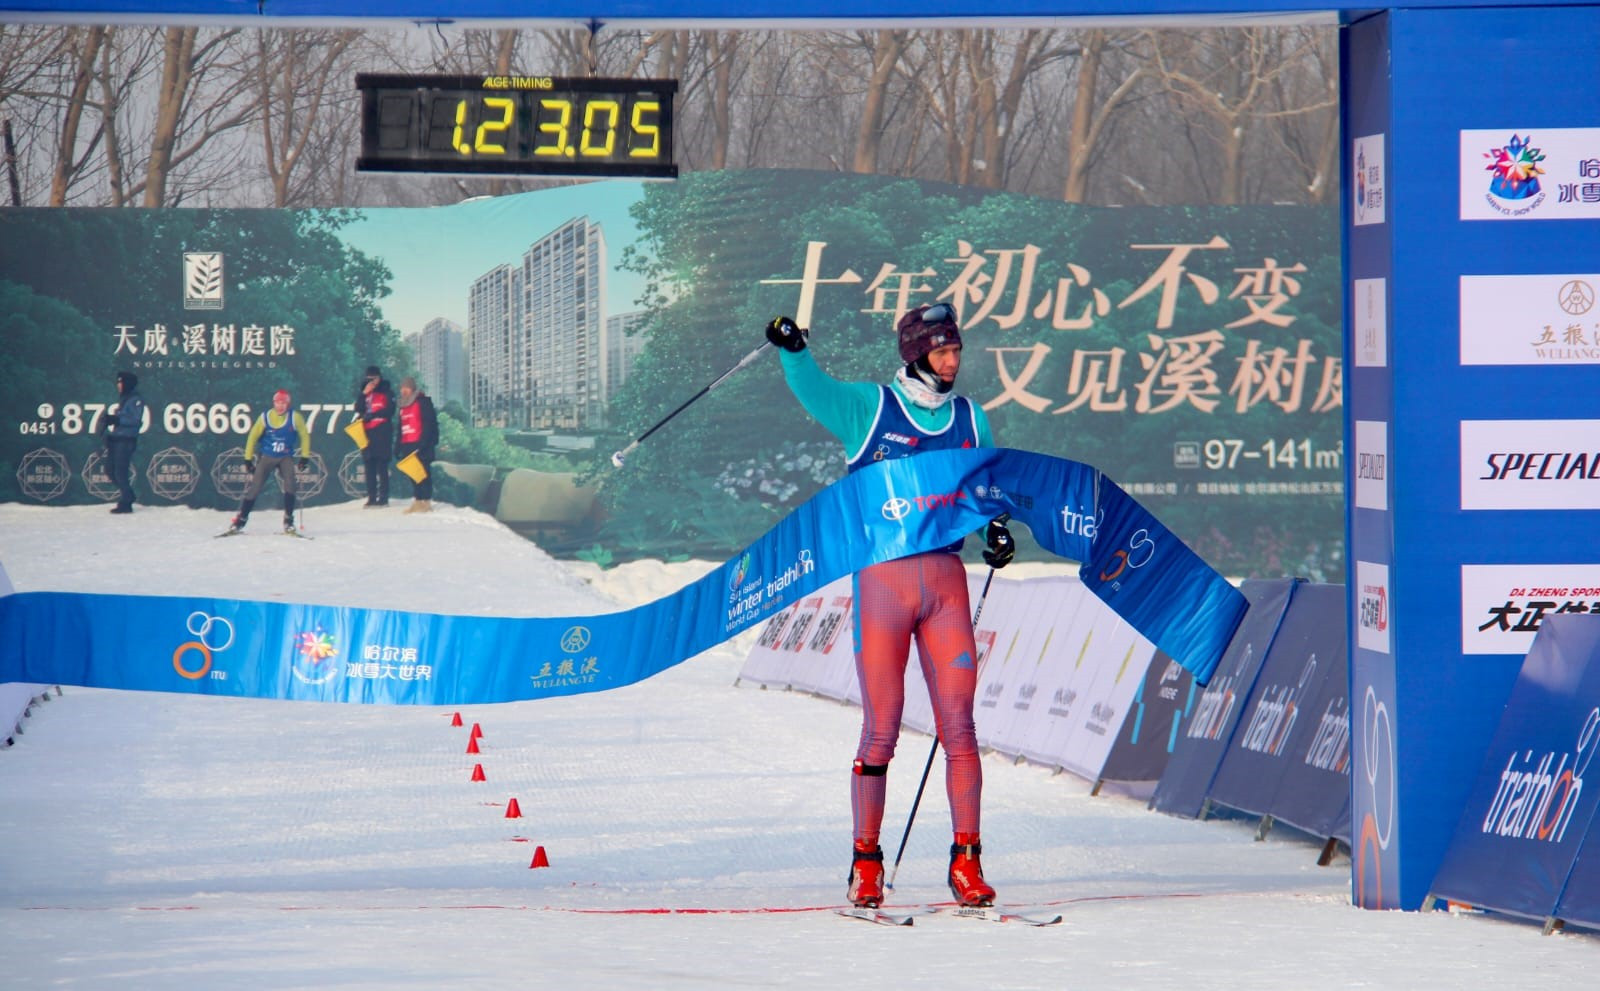 China held the first Winter Triathlon World Cup event earlier this year ©World Triathlon